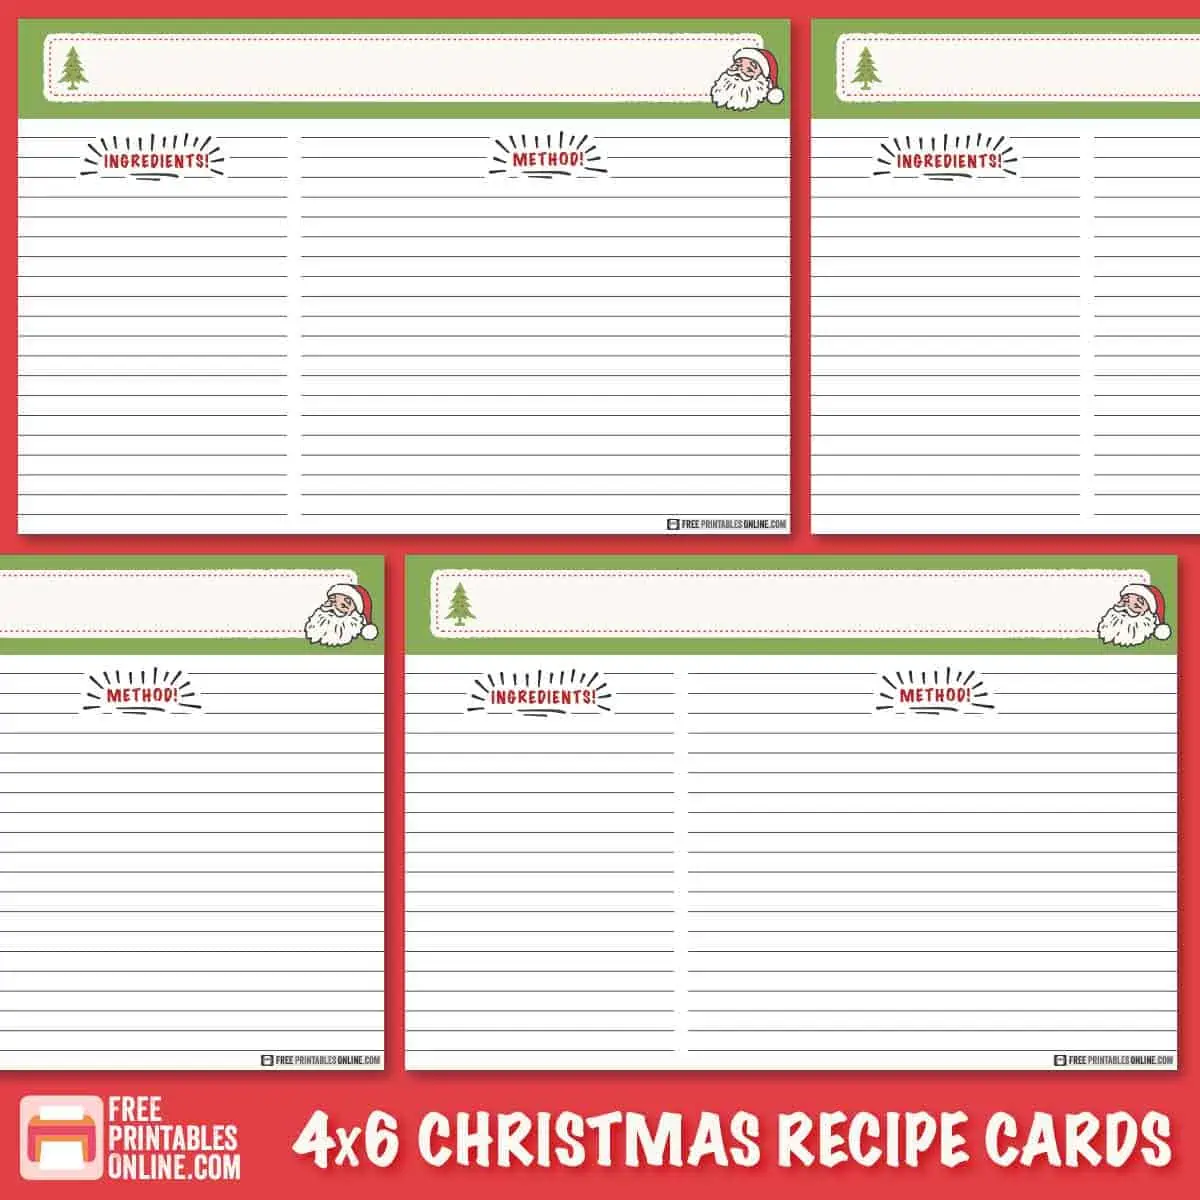 Recipe Box Dividers Archives - Free Printables Online